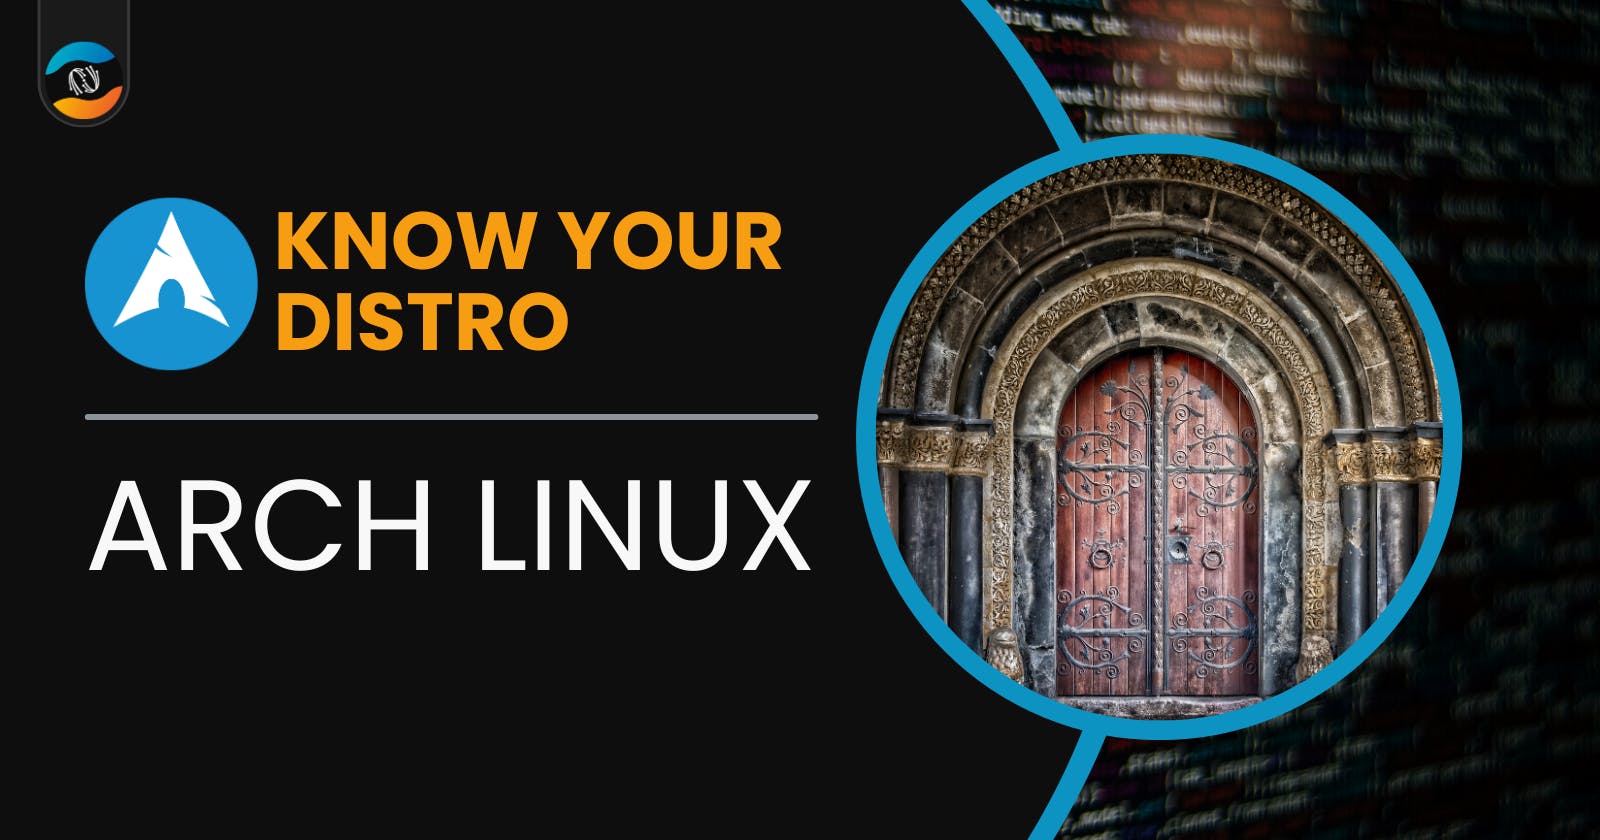 Arch Linux: The Linux Distribution for Power Users